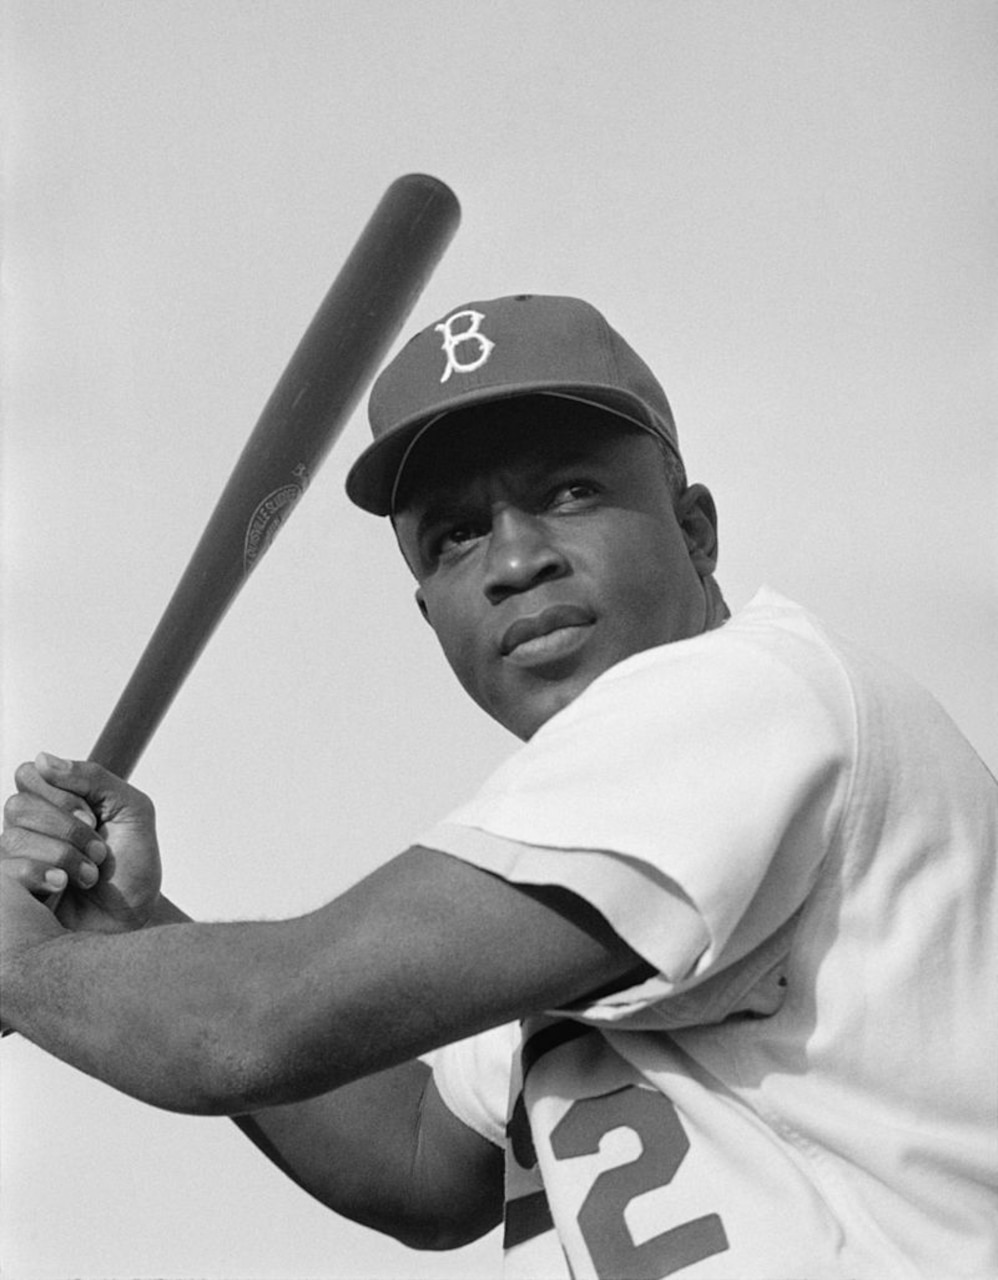 A baseball player, holding a bat, poses for a photo.